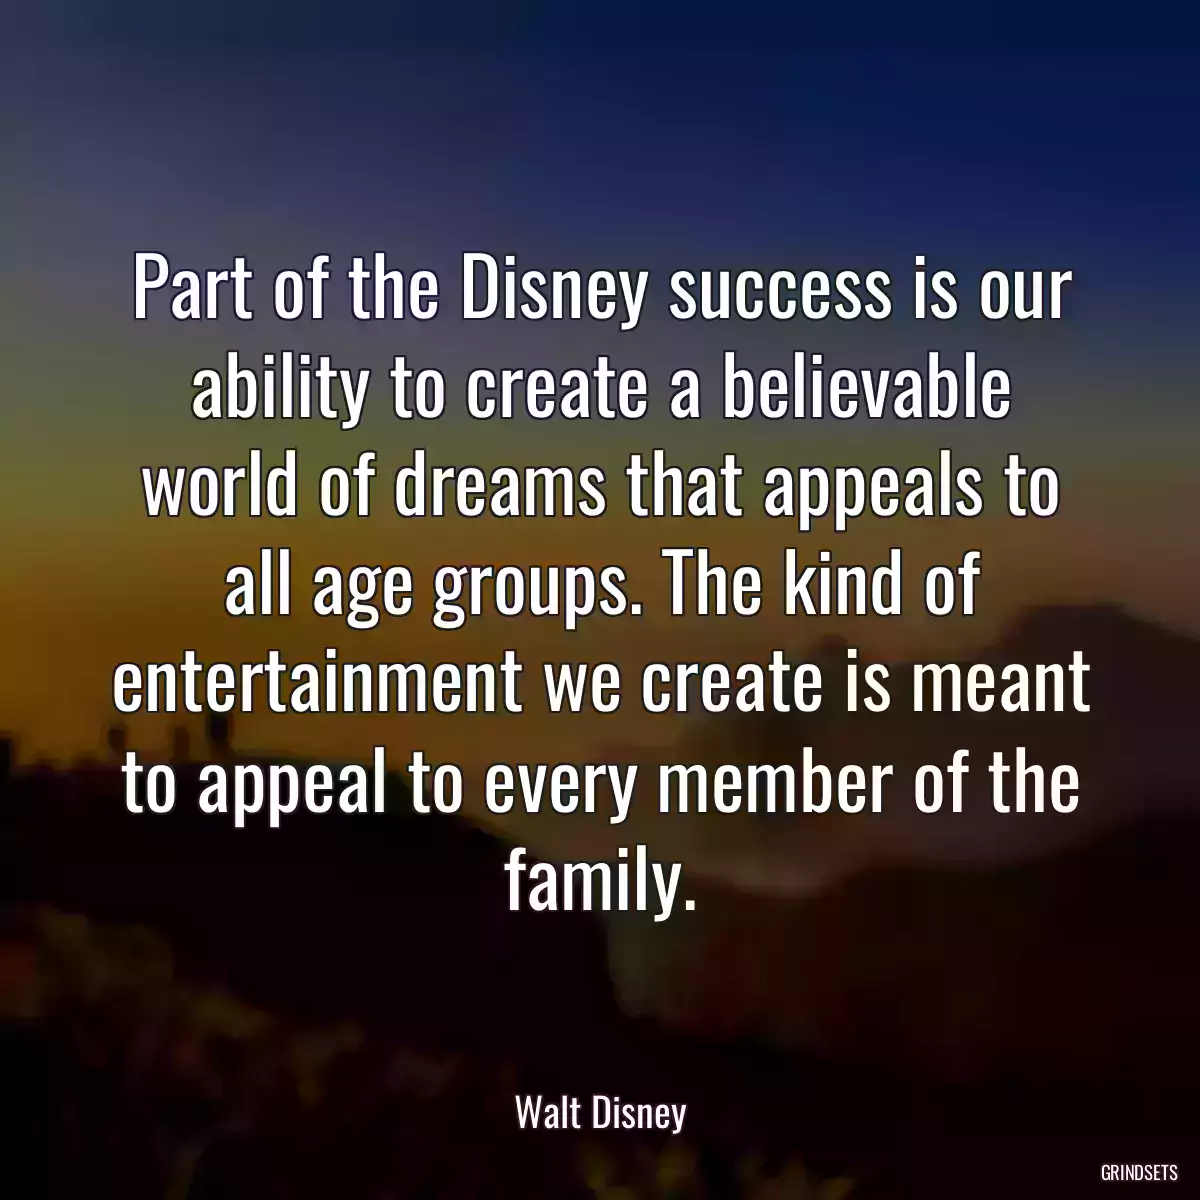 Part of the Disney success is our ability to create a believable world of dreams that appeals to all age groups. The kind of entertainment we create is meant to appeal to every member of the family.